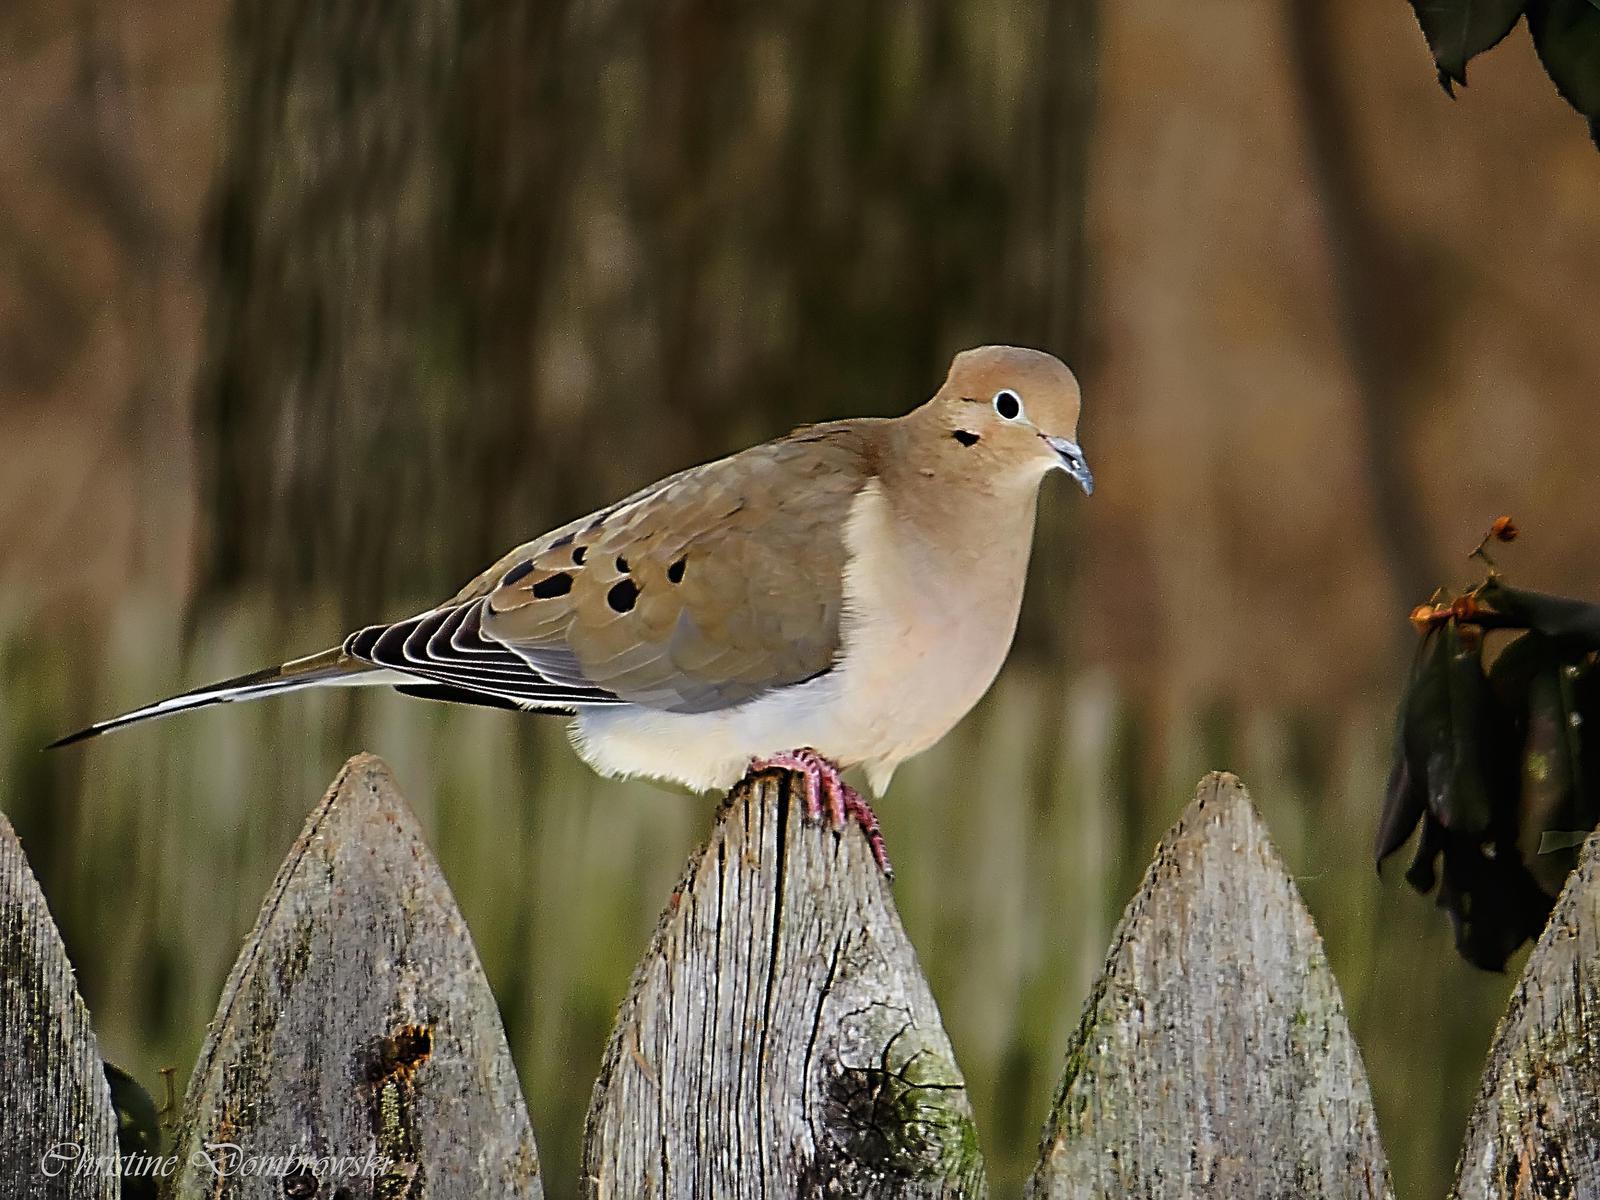 Mourning Dove Photo by Christine Dombrowski